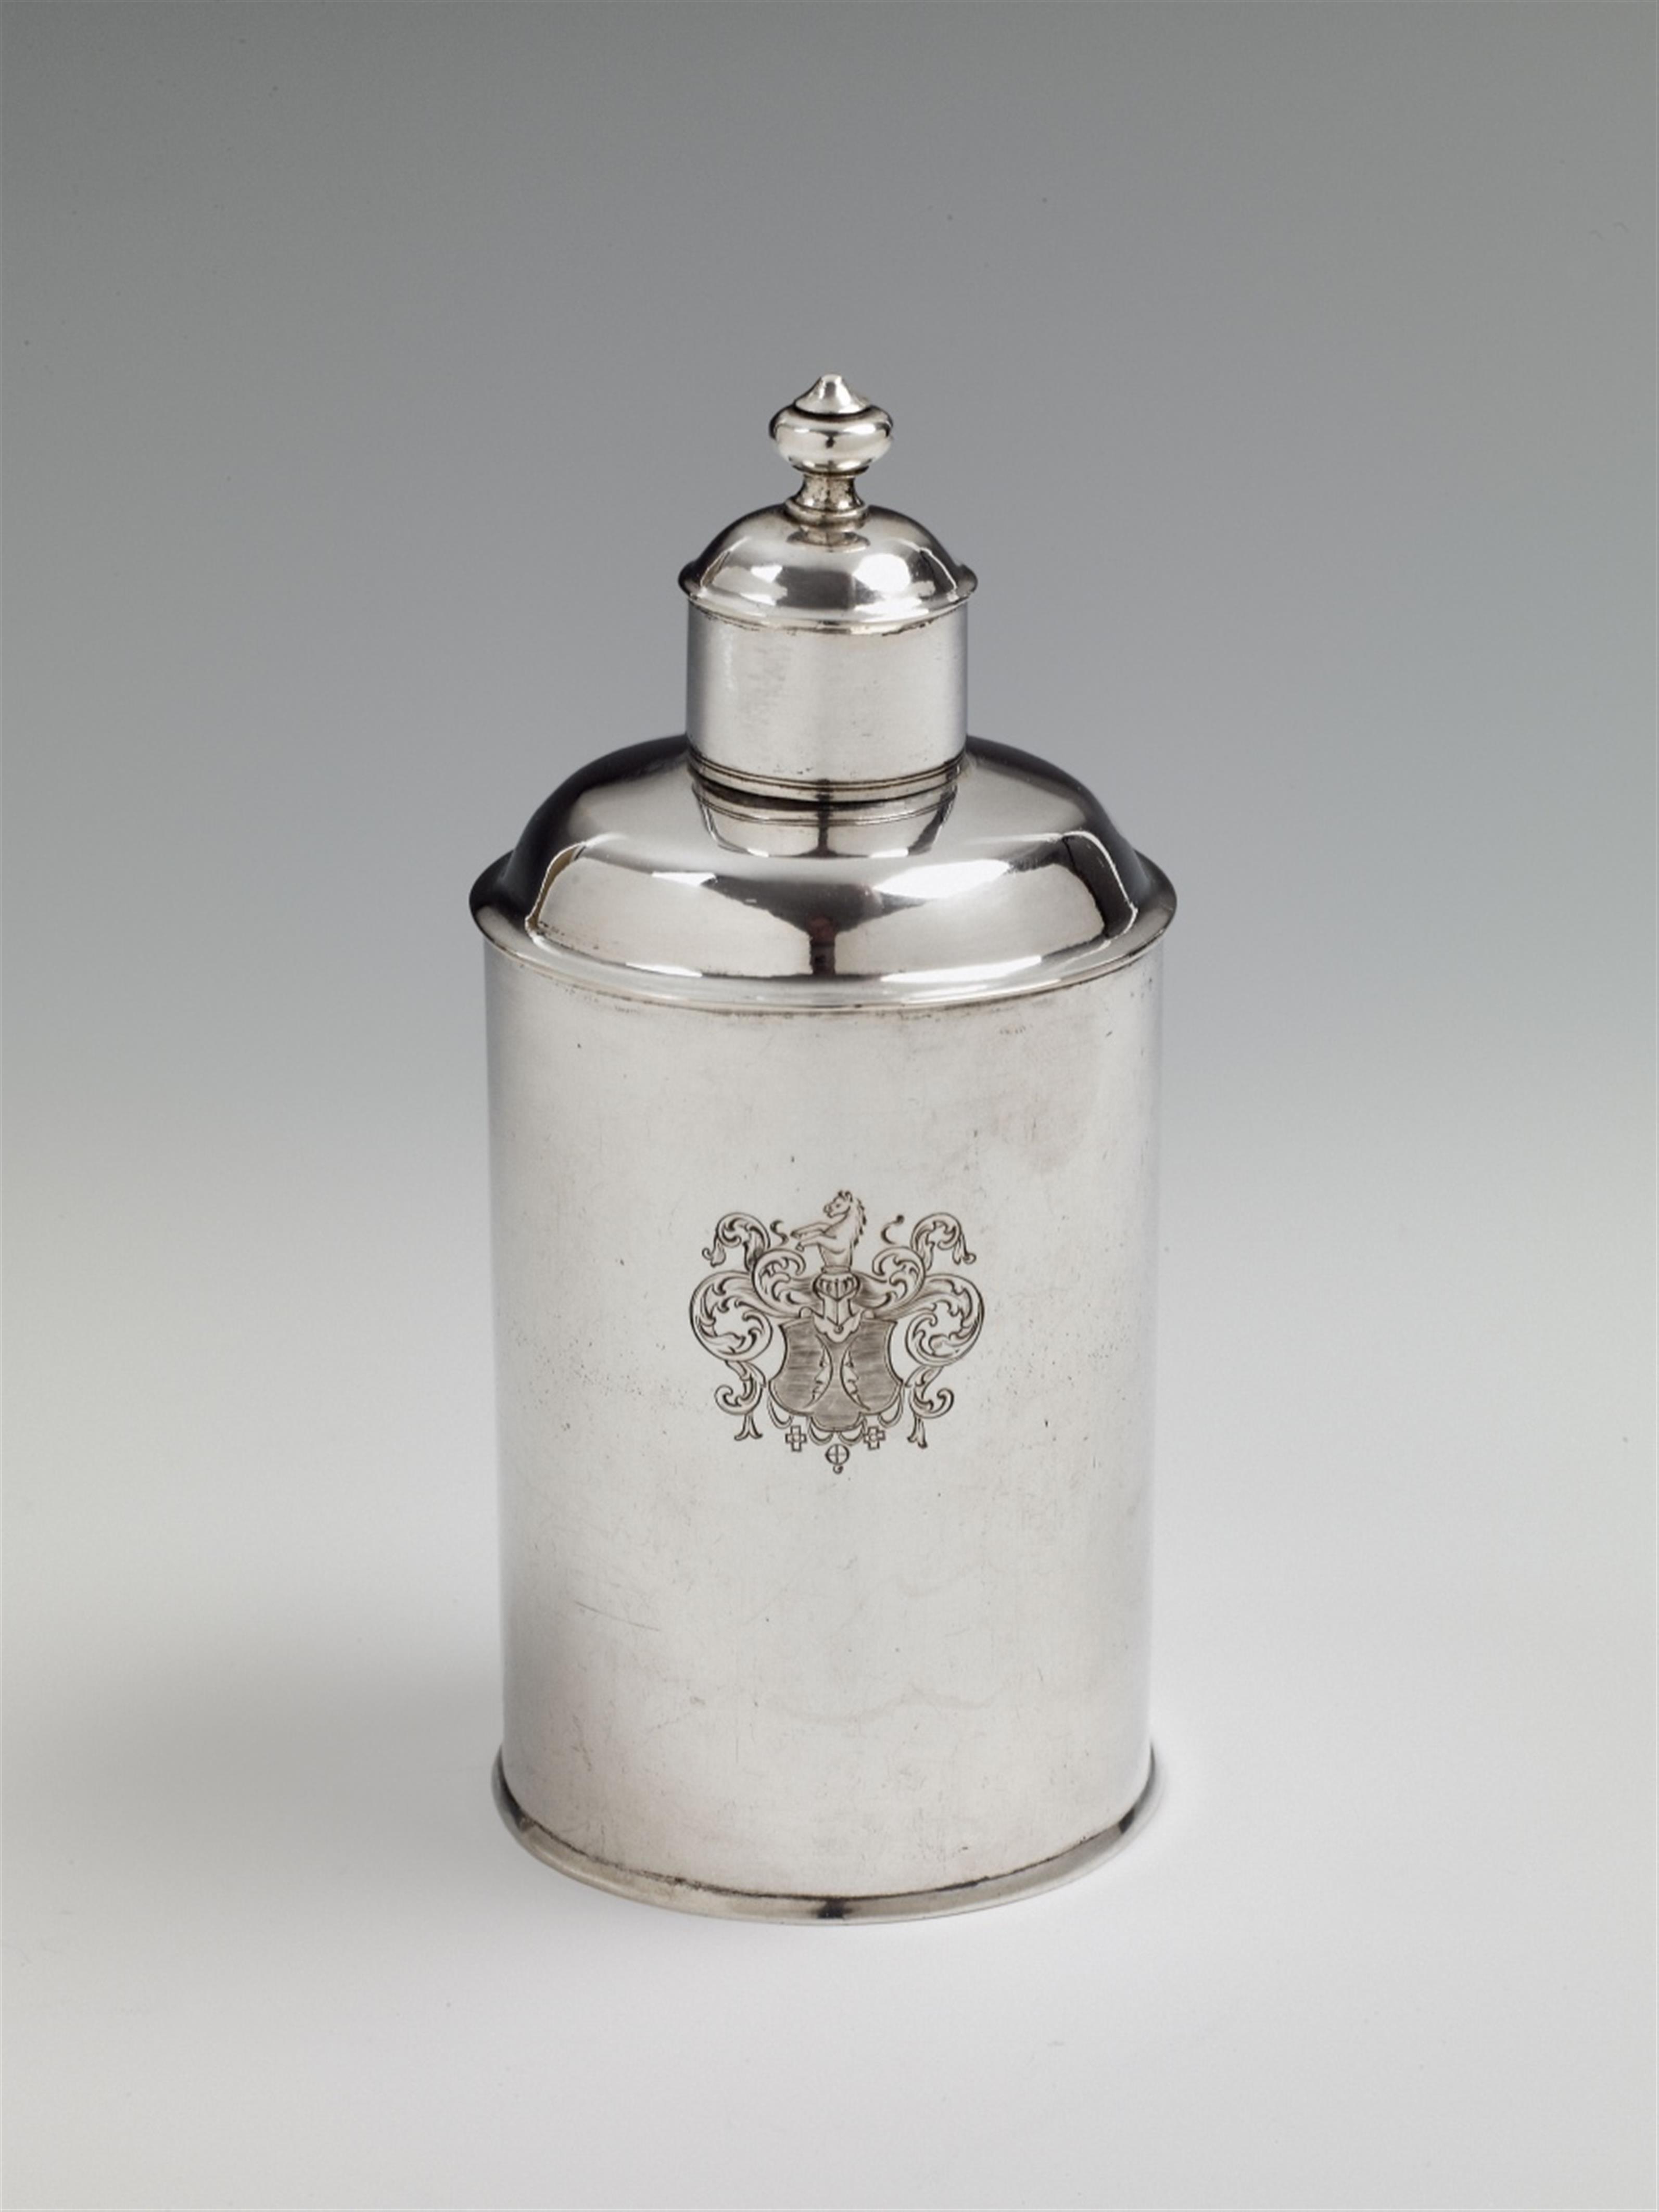 A Berlin silver tea caddy. The body engraved with a coat-of-arms, the base monogrammed "H.v.T.". Marks of Johann Bernhard or Martin Friedrich Müller, ca. 1780. - image-1